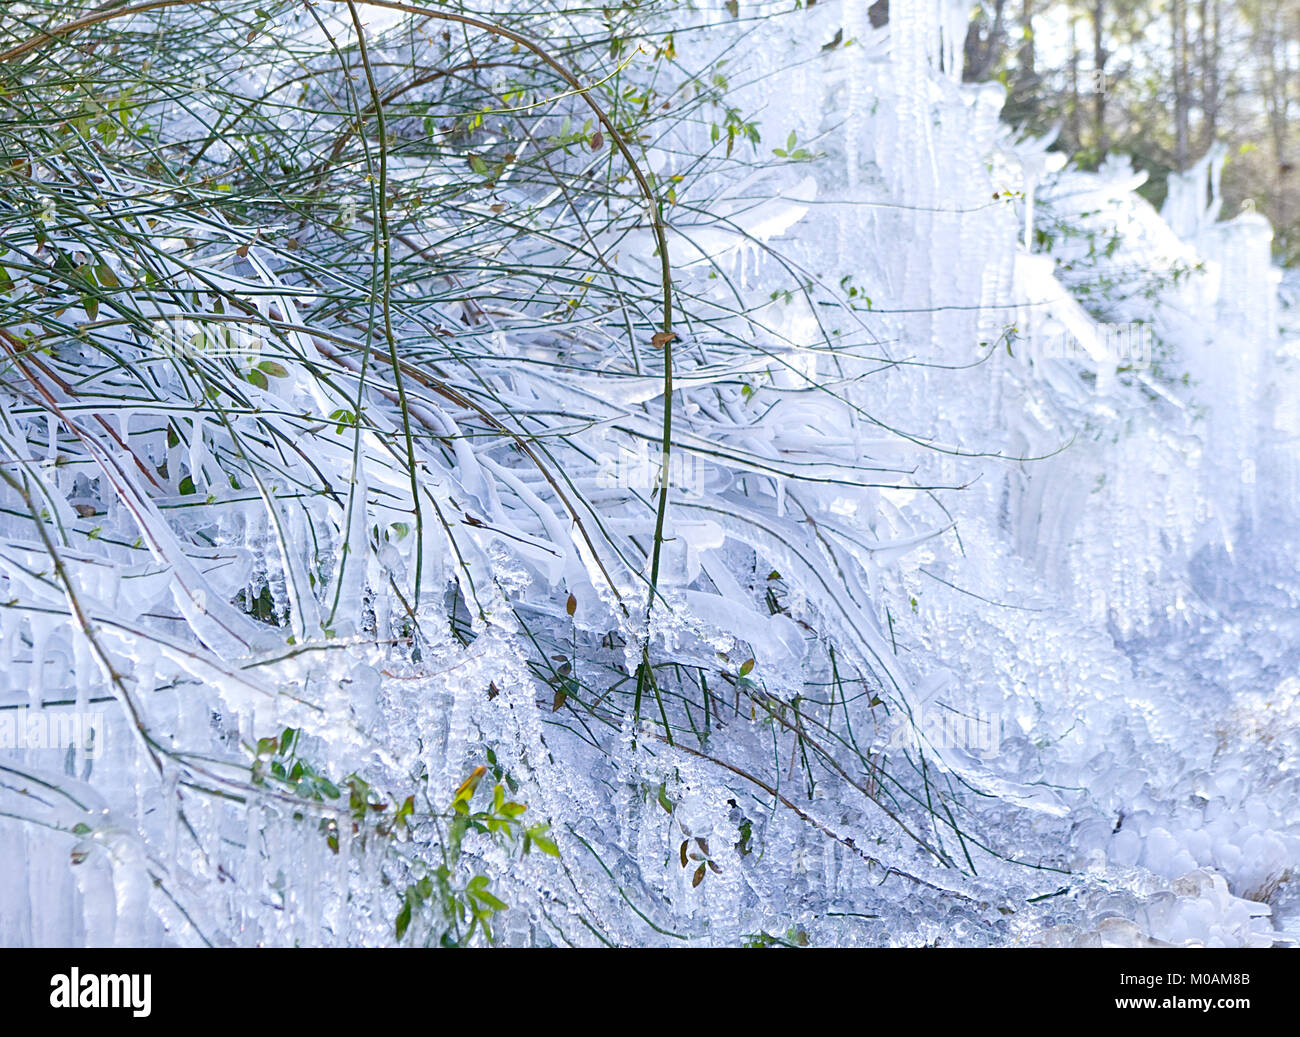 Frozen plants covered in icicles after a winter storm Stock Photo